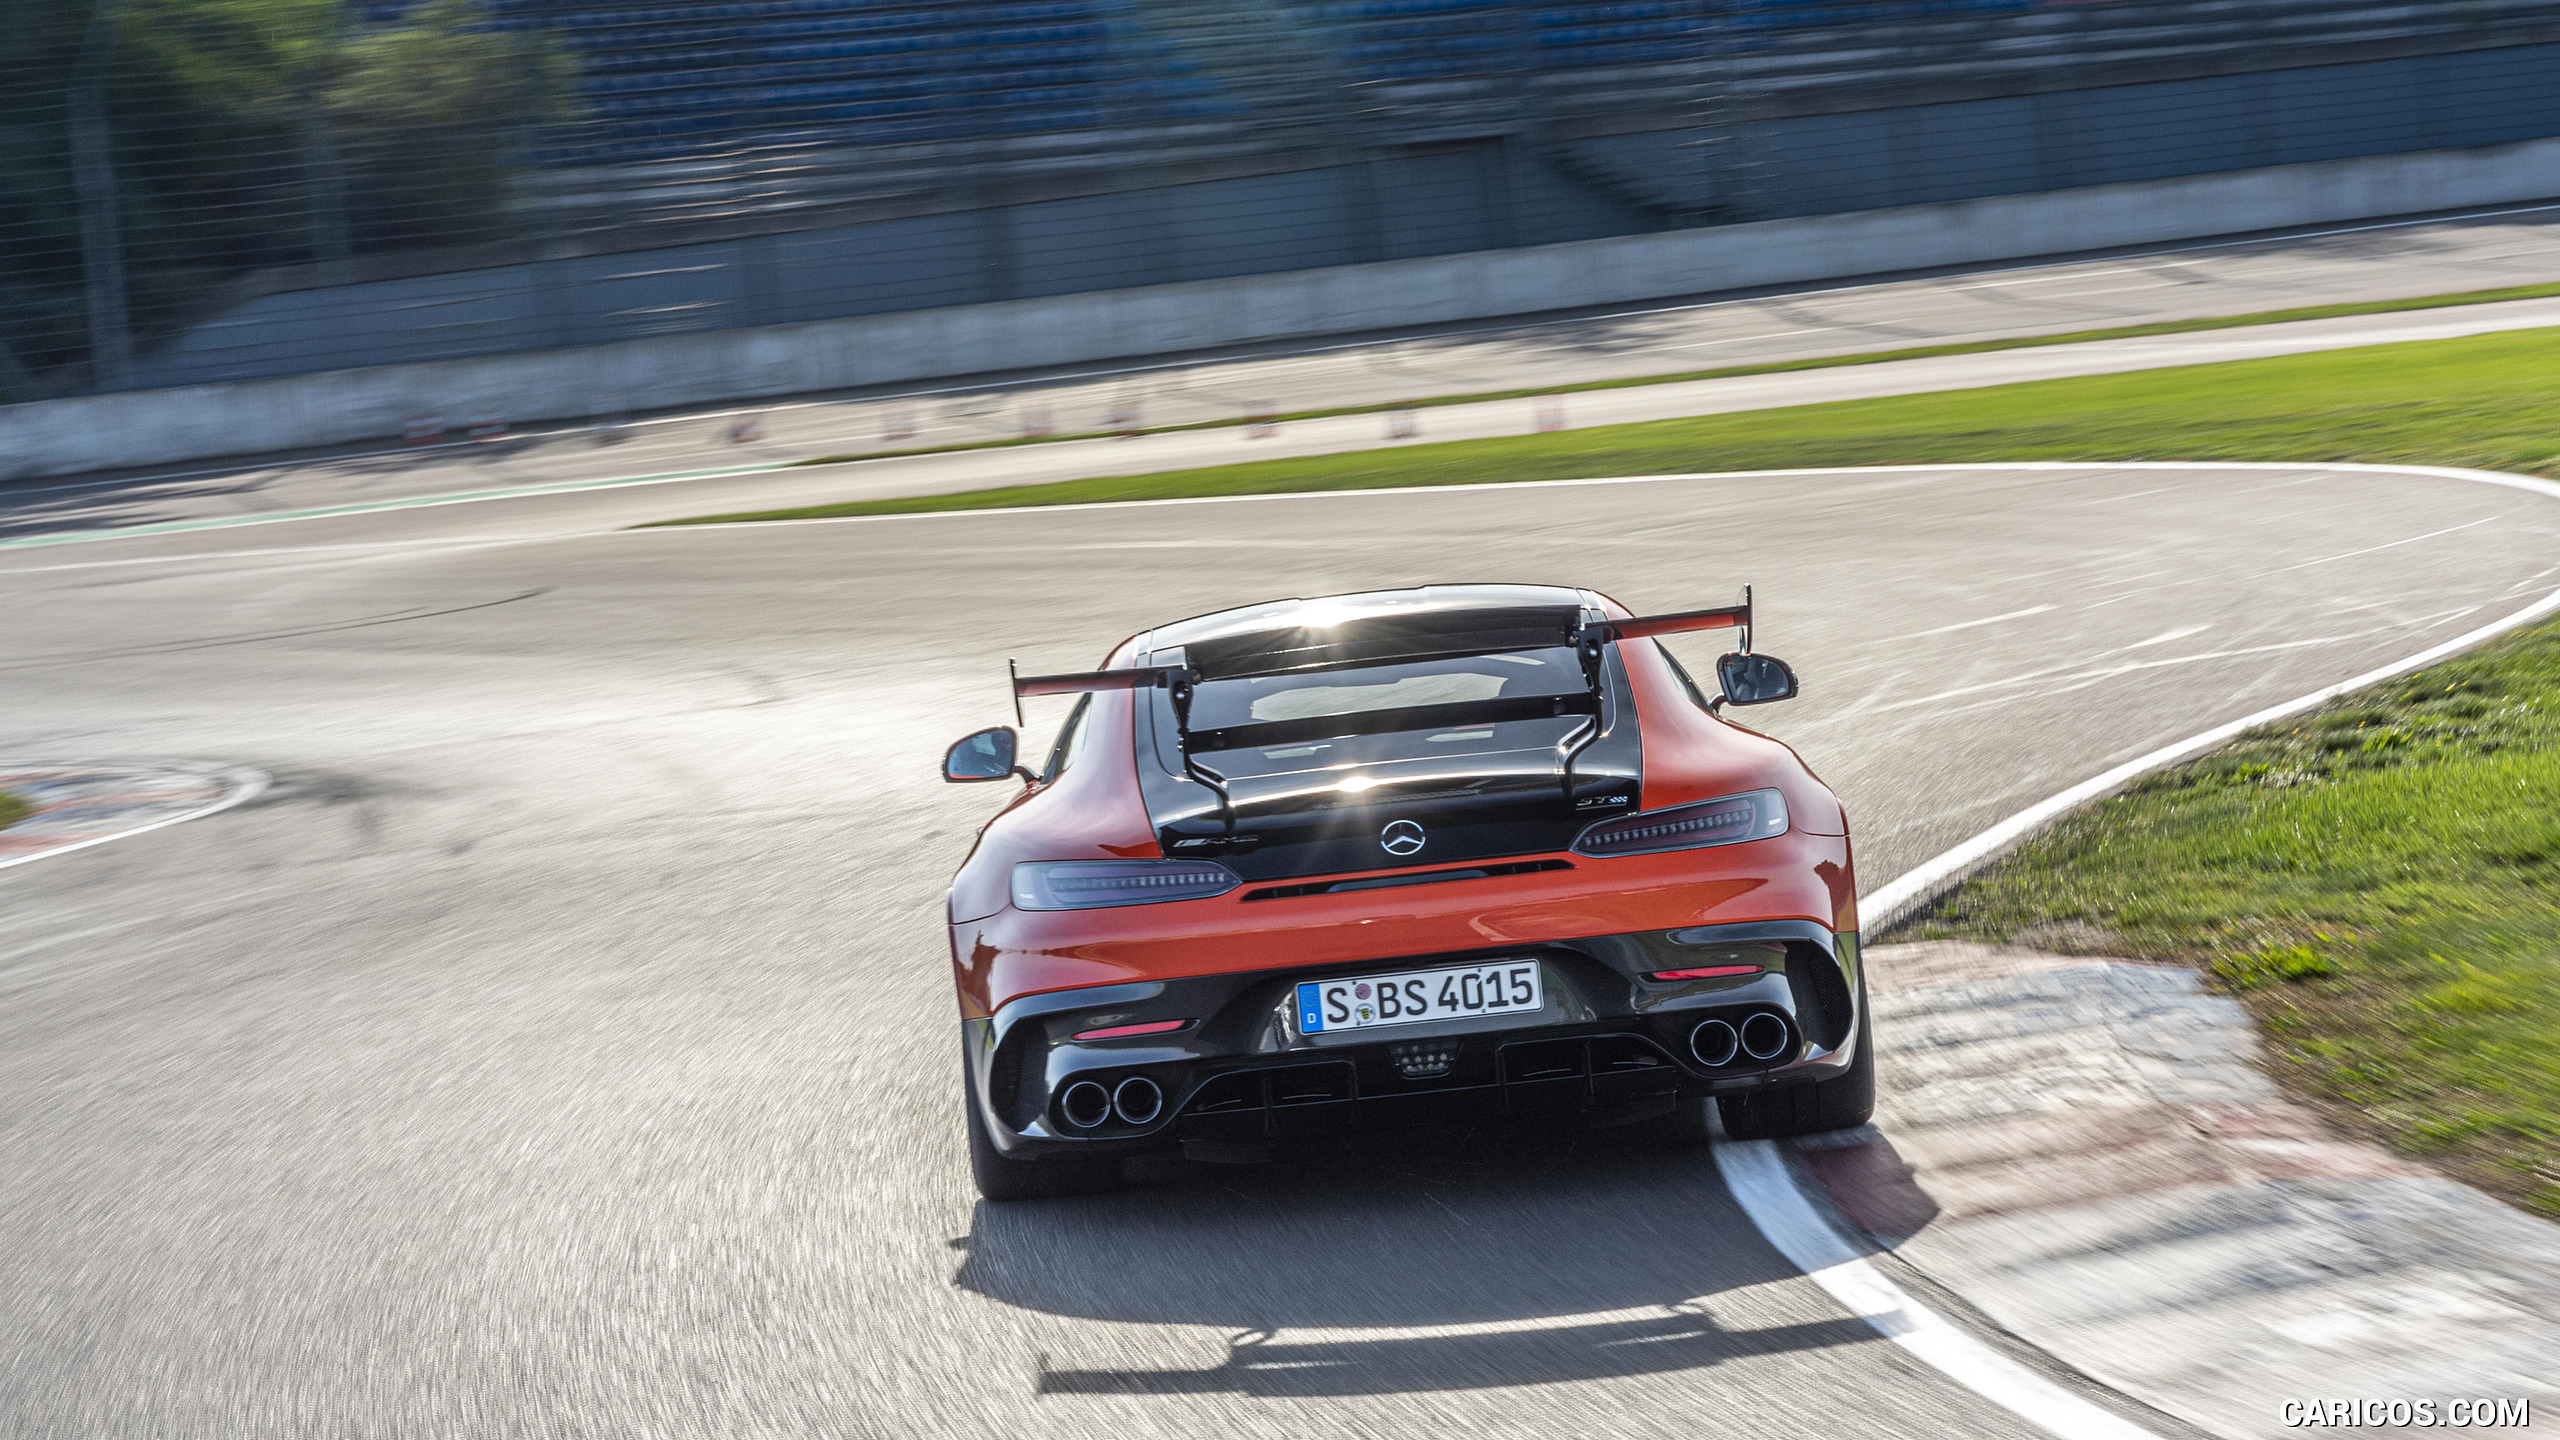 2021 Mercedes-AMG GT Black Series (Color: Magma Beam) - Rear, #121 of 215